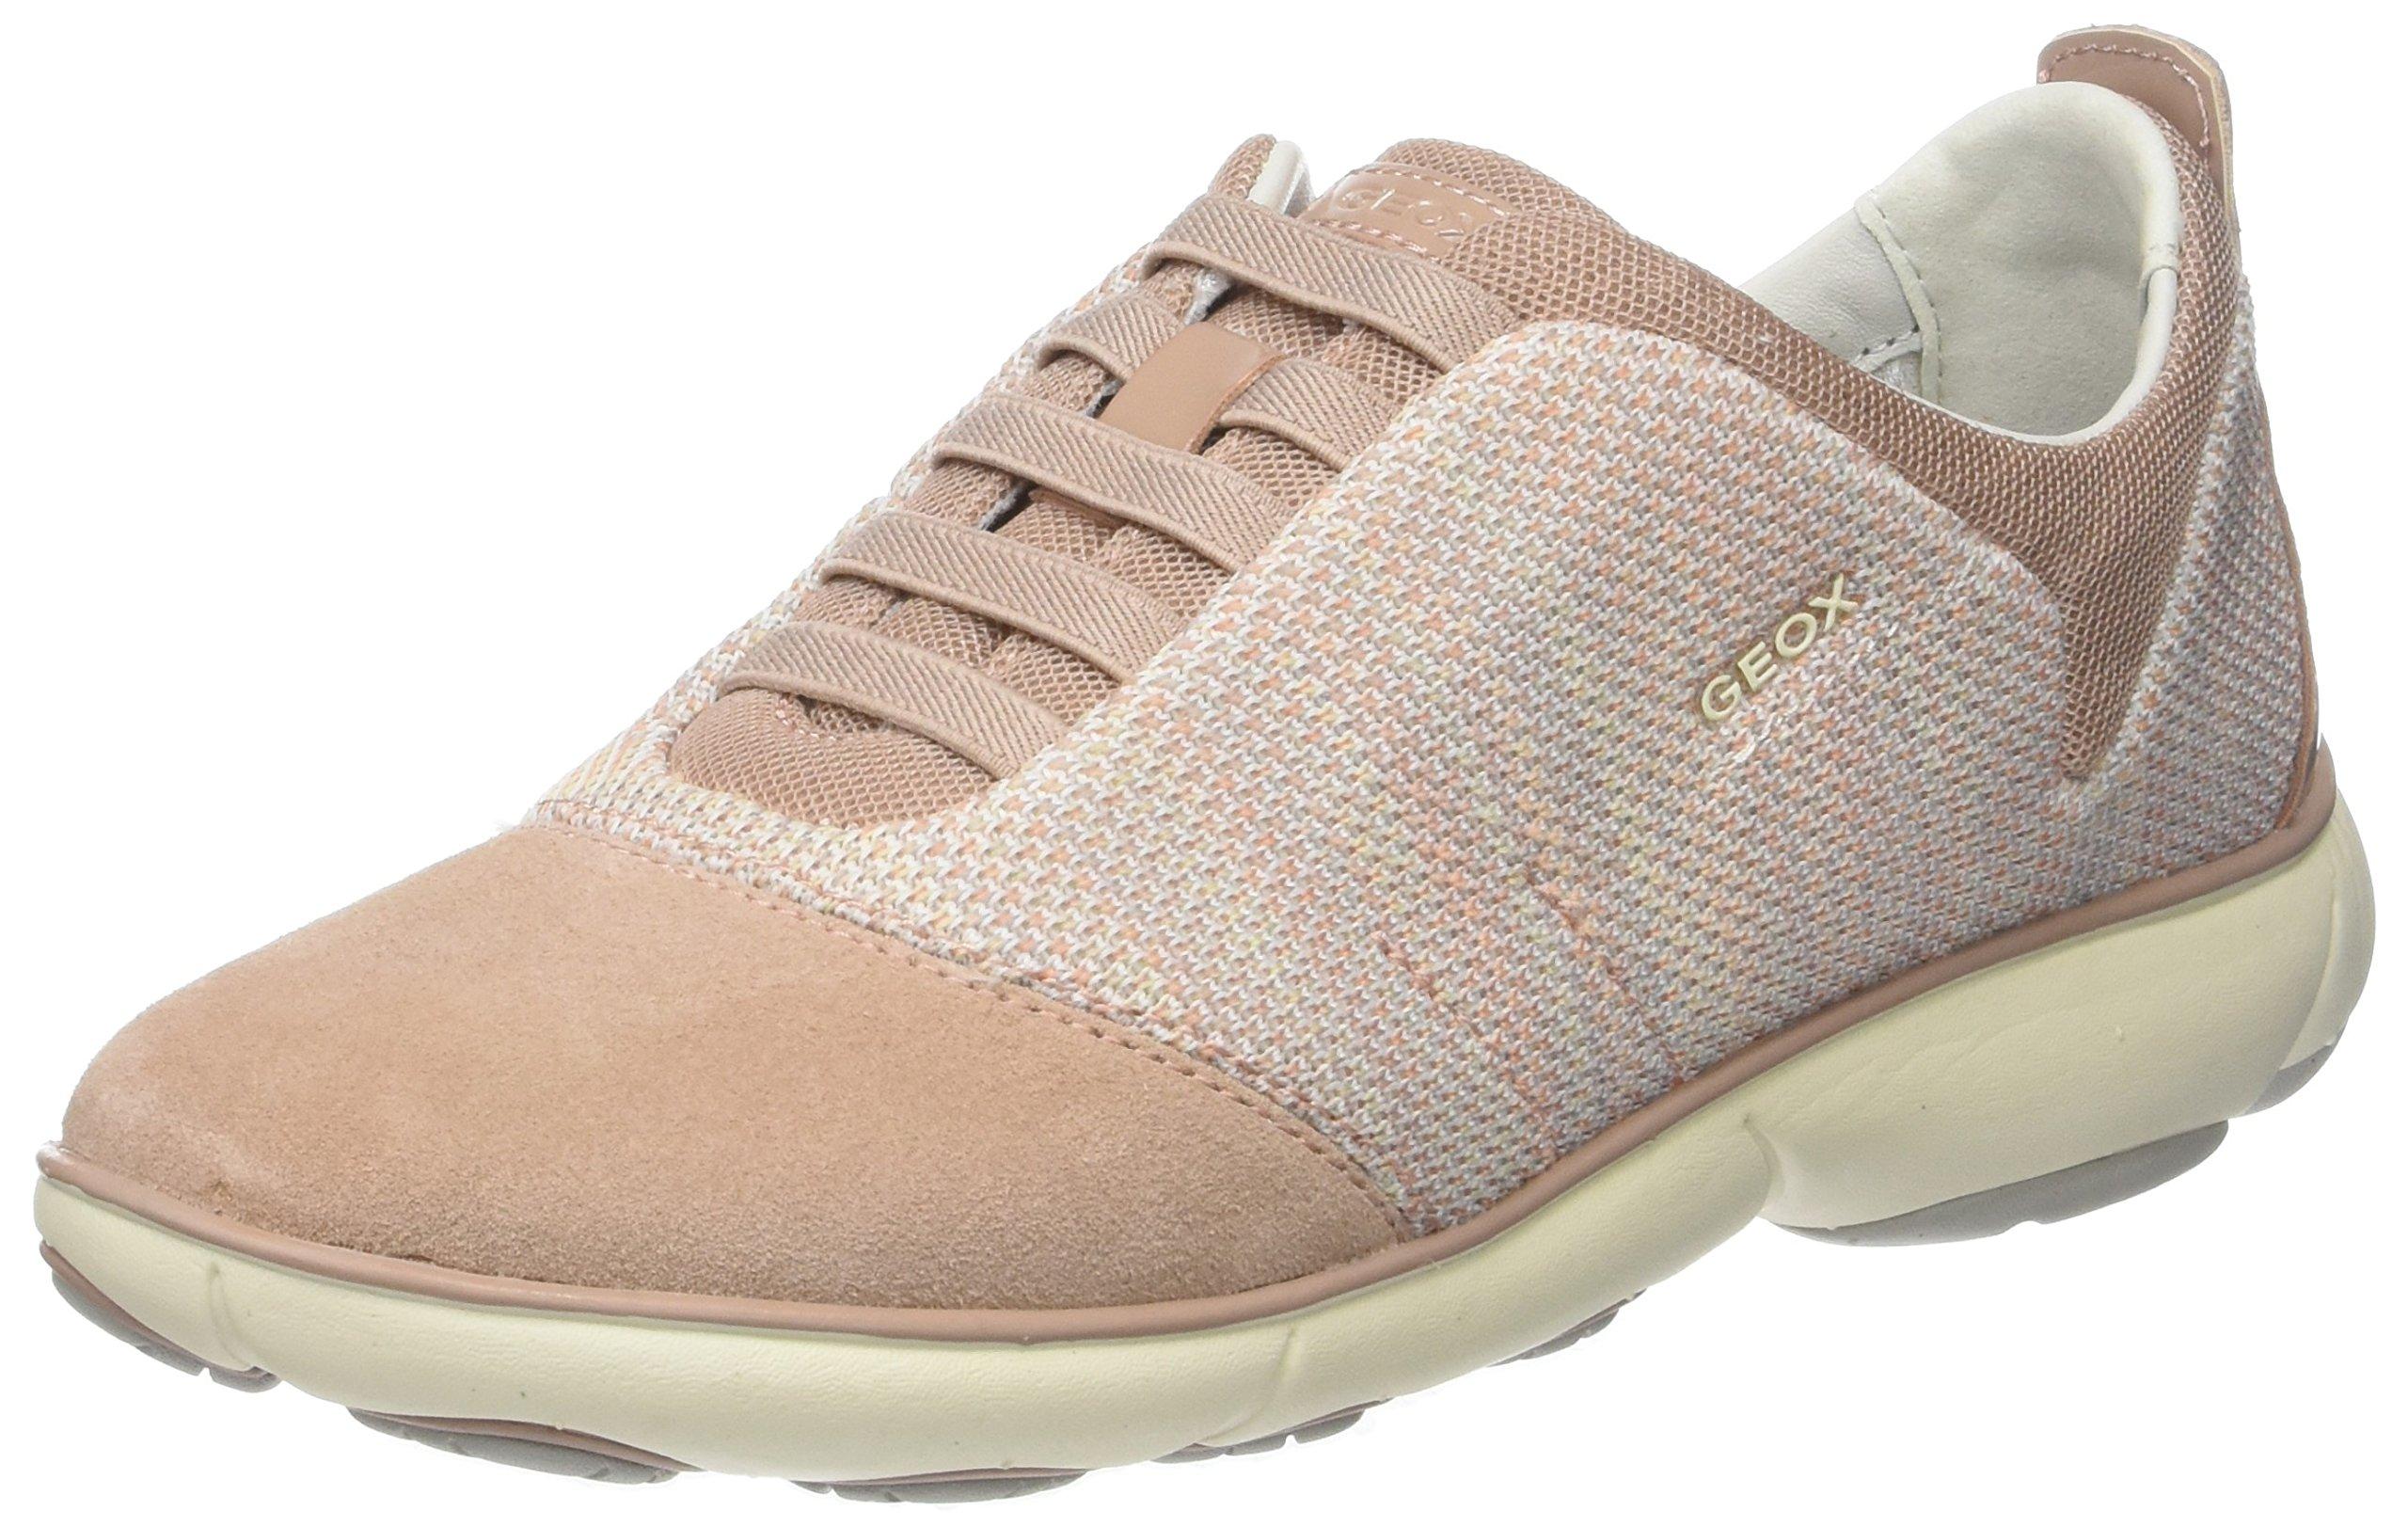 Geox Suede Nebula 16 Sneaker in Pink Antique Rose (Pink) - Save 42% - Lyst